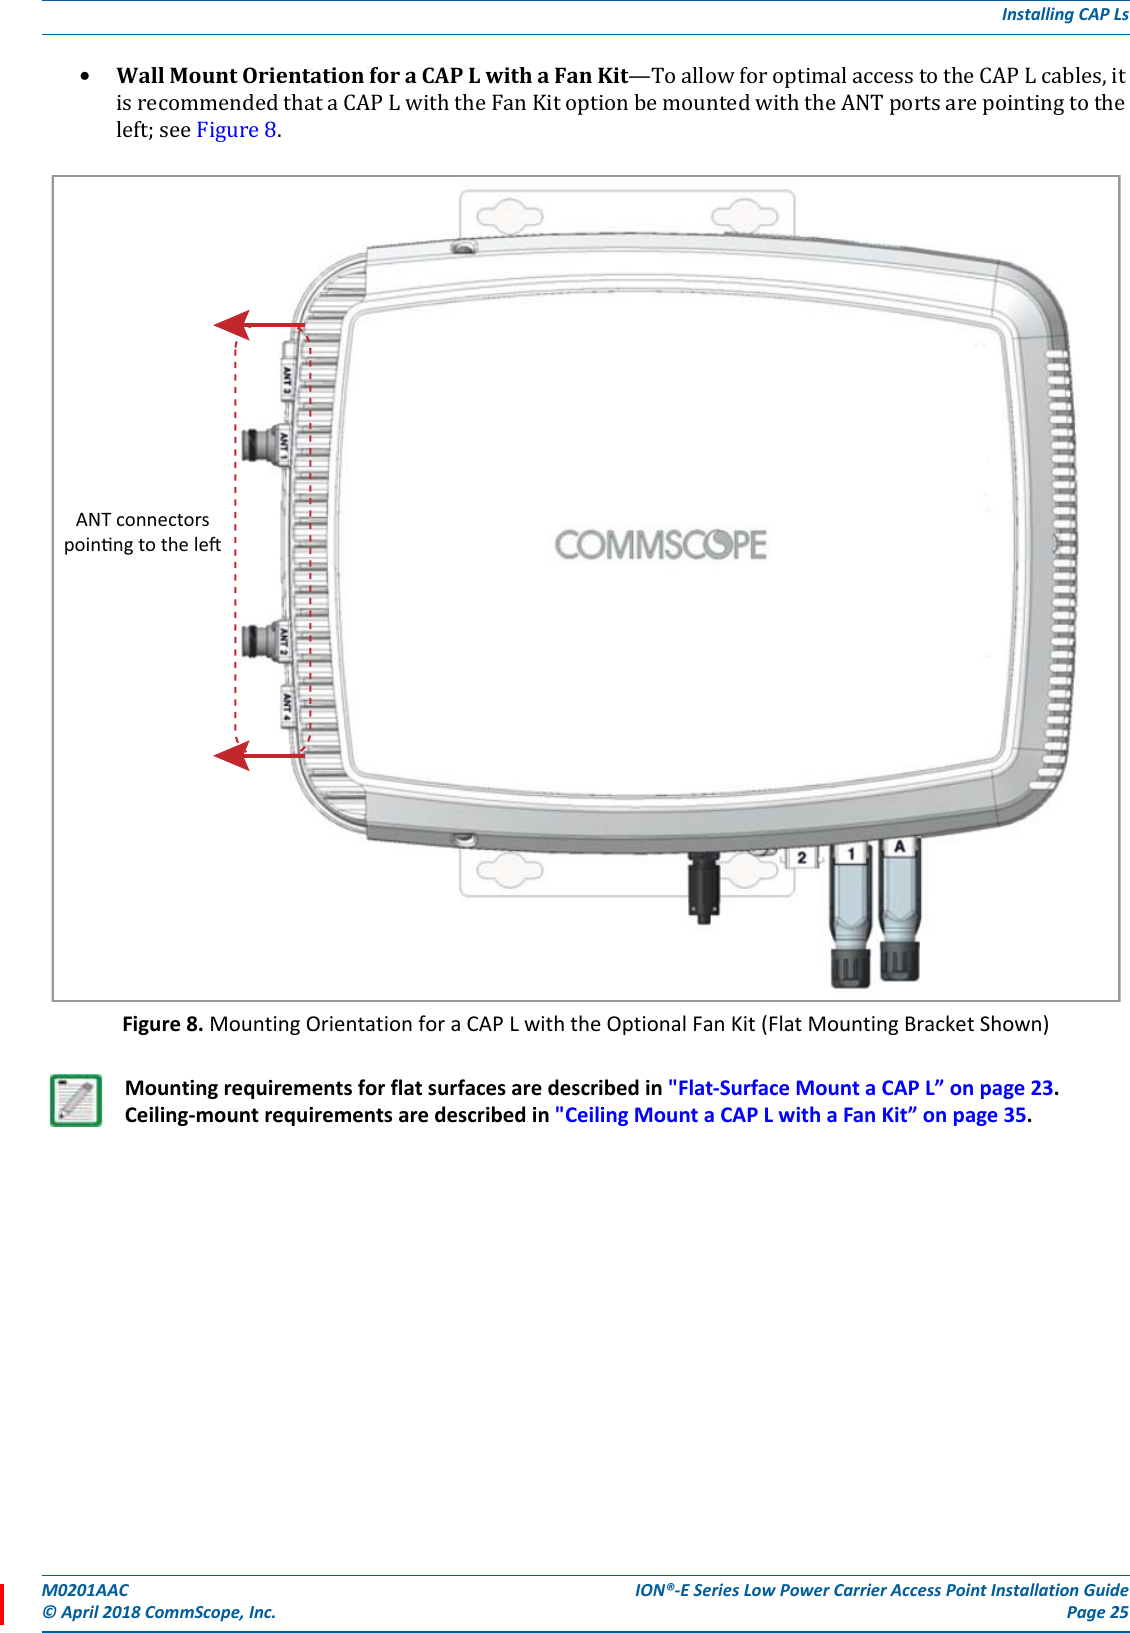 M0201AAC ION®-E Series Low Power Carrier Access Point Installation Guide© April 2018 CommScope, Inc. Page 25Installing CAP Ls•WallMountOrientationforaCAPLwithaFanKit—ToallowforoptimalaccesstotheCAPLcables,itisrecommendedthataCAPLwiththeFanKitoptionbemountedwiththeANTportsarepointingtotheleft;seeFigure8.Figure 8. Mounting Orientation for a CAP L with the Optional Fan Kit (Flat Mounting Bracket Shown)Mounting requirements for flat surfaces are described in &quot;Flat-Surface Mount a CAP L” on page 23. Ceiling-mount requirements are described in &quot;Ceiling Mount a CAP L with a Fan Kit” on page 35.ANT connectorspoinng to the le